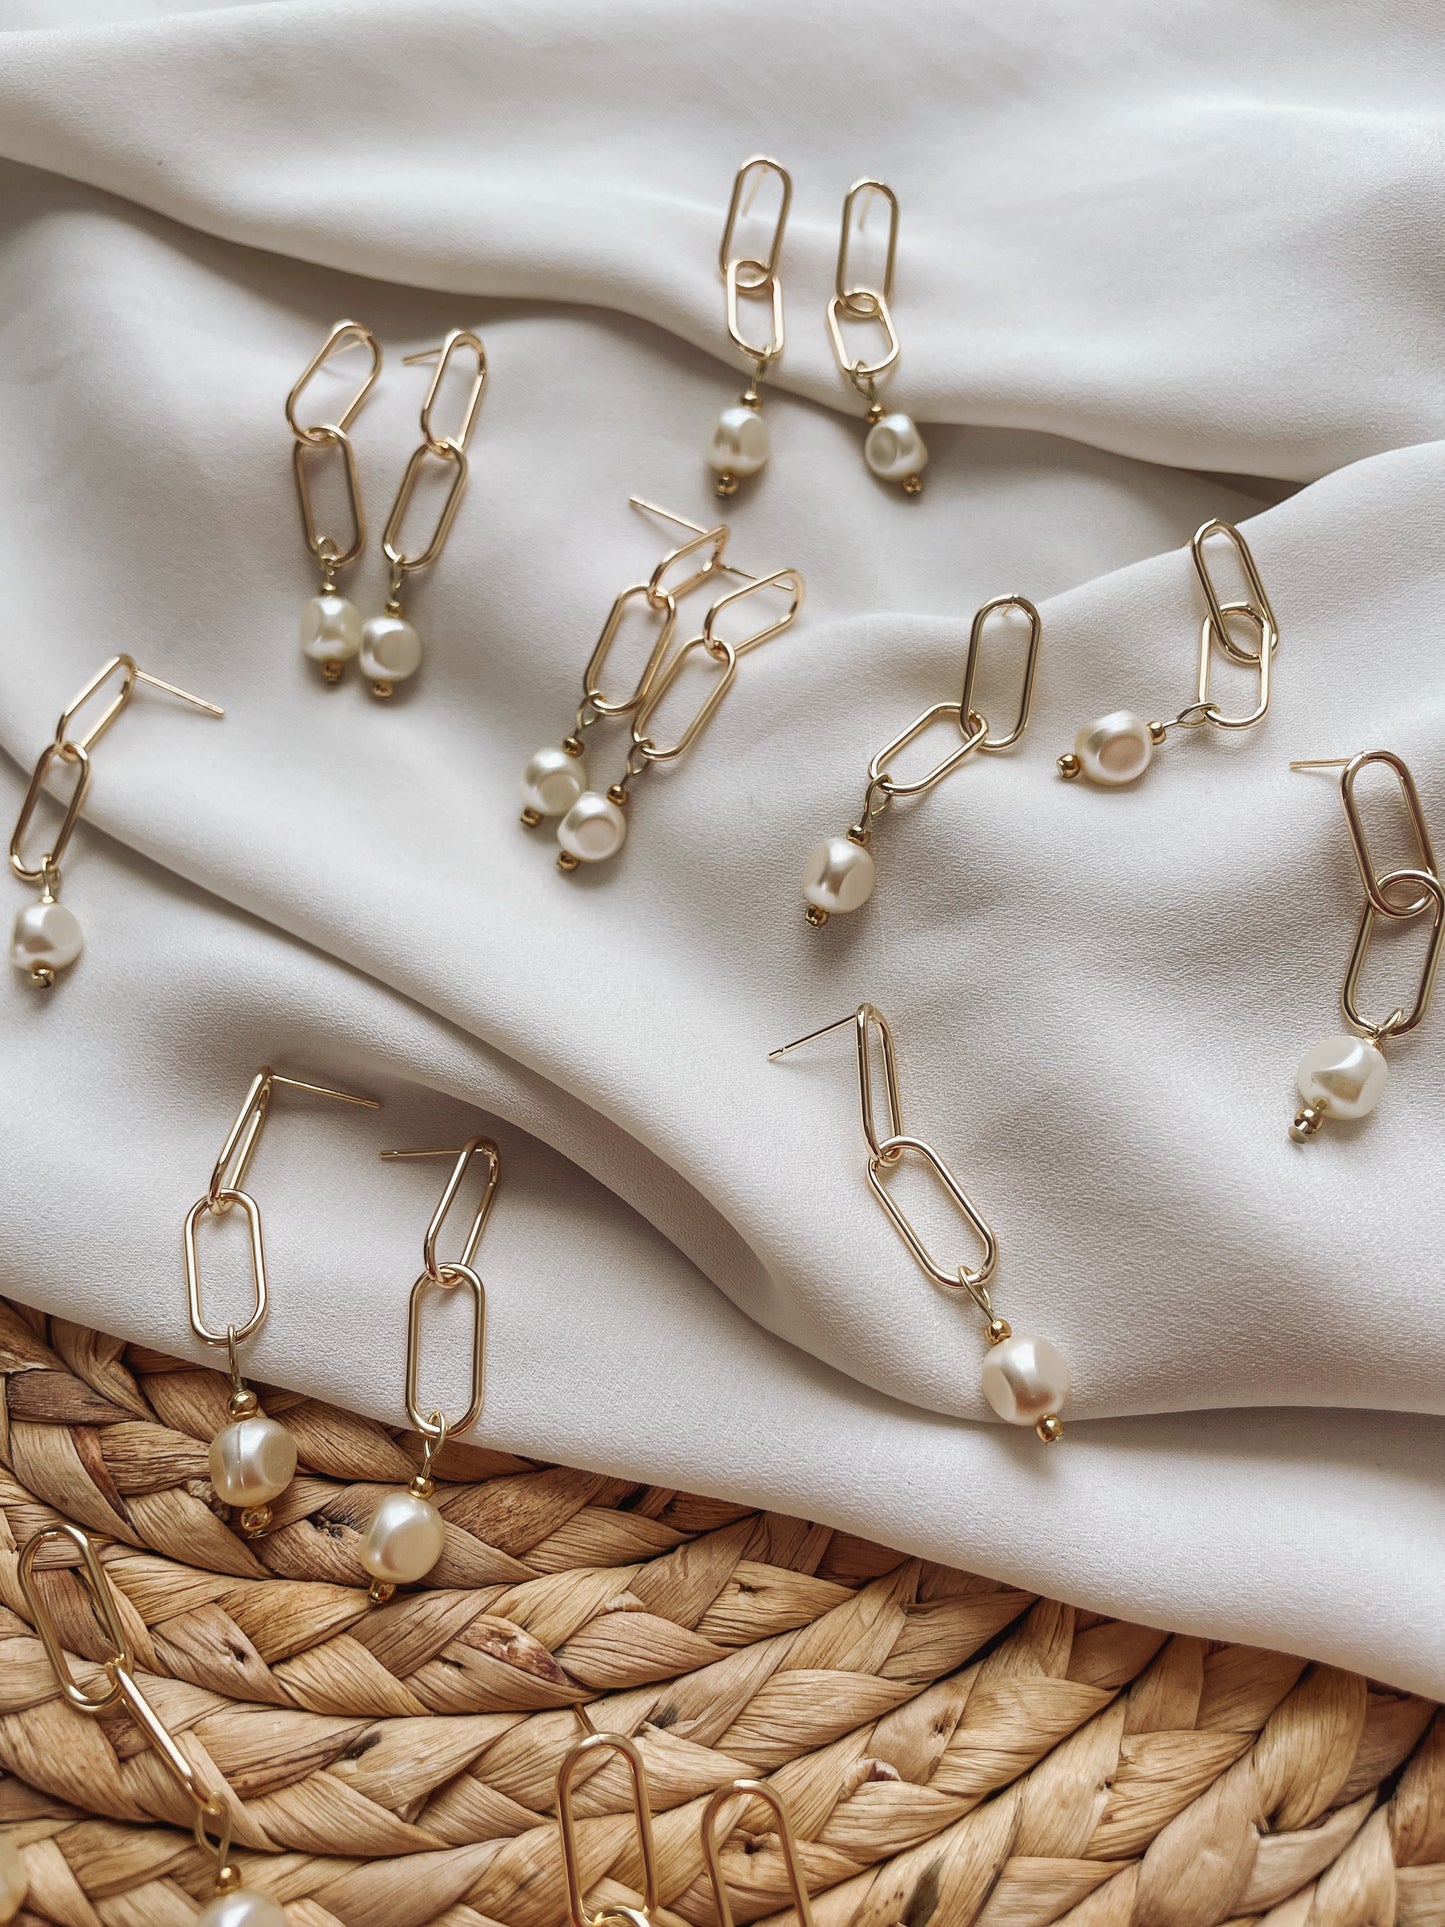 Gold Paperclip-Inspired Earrings with Pearls